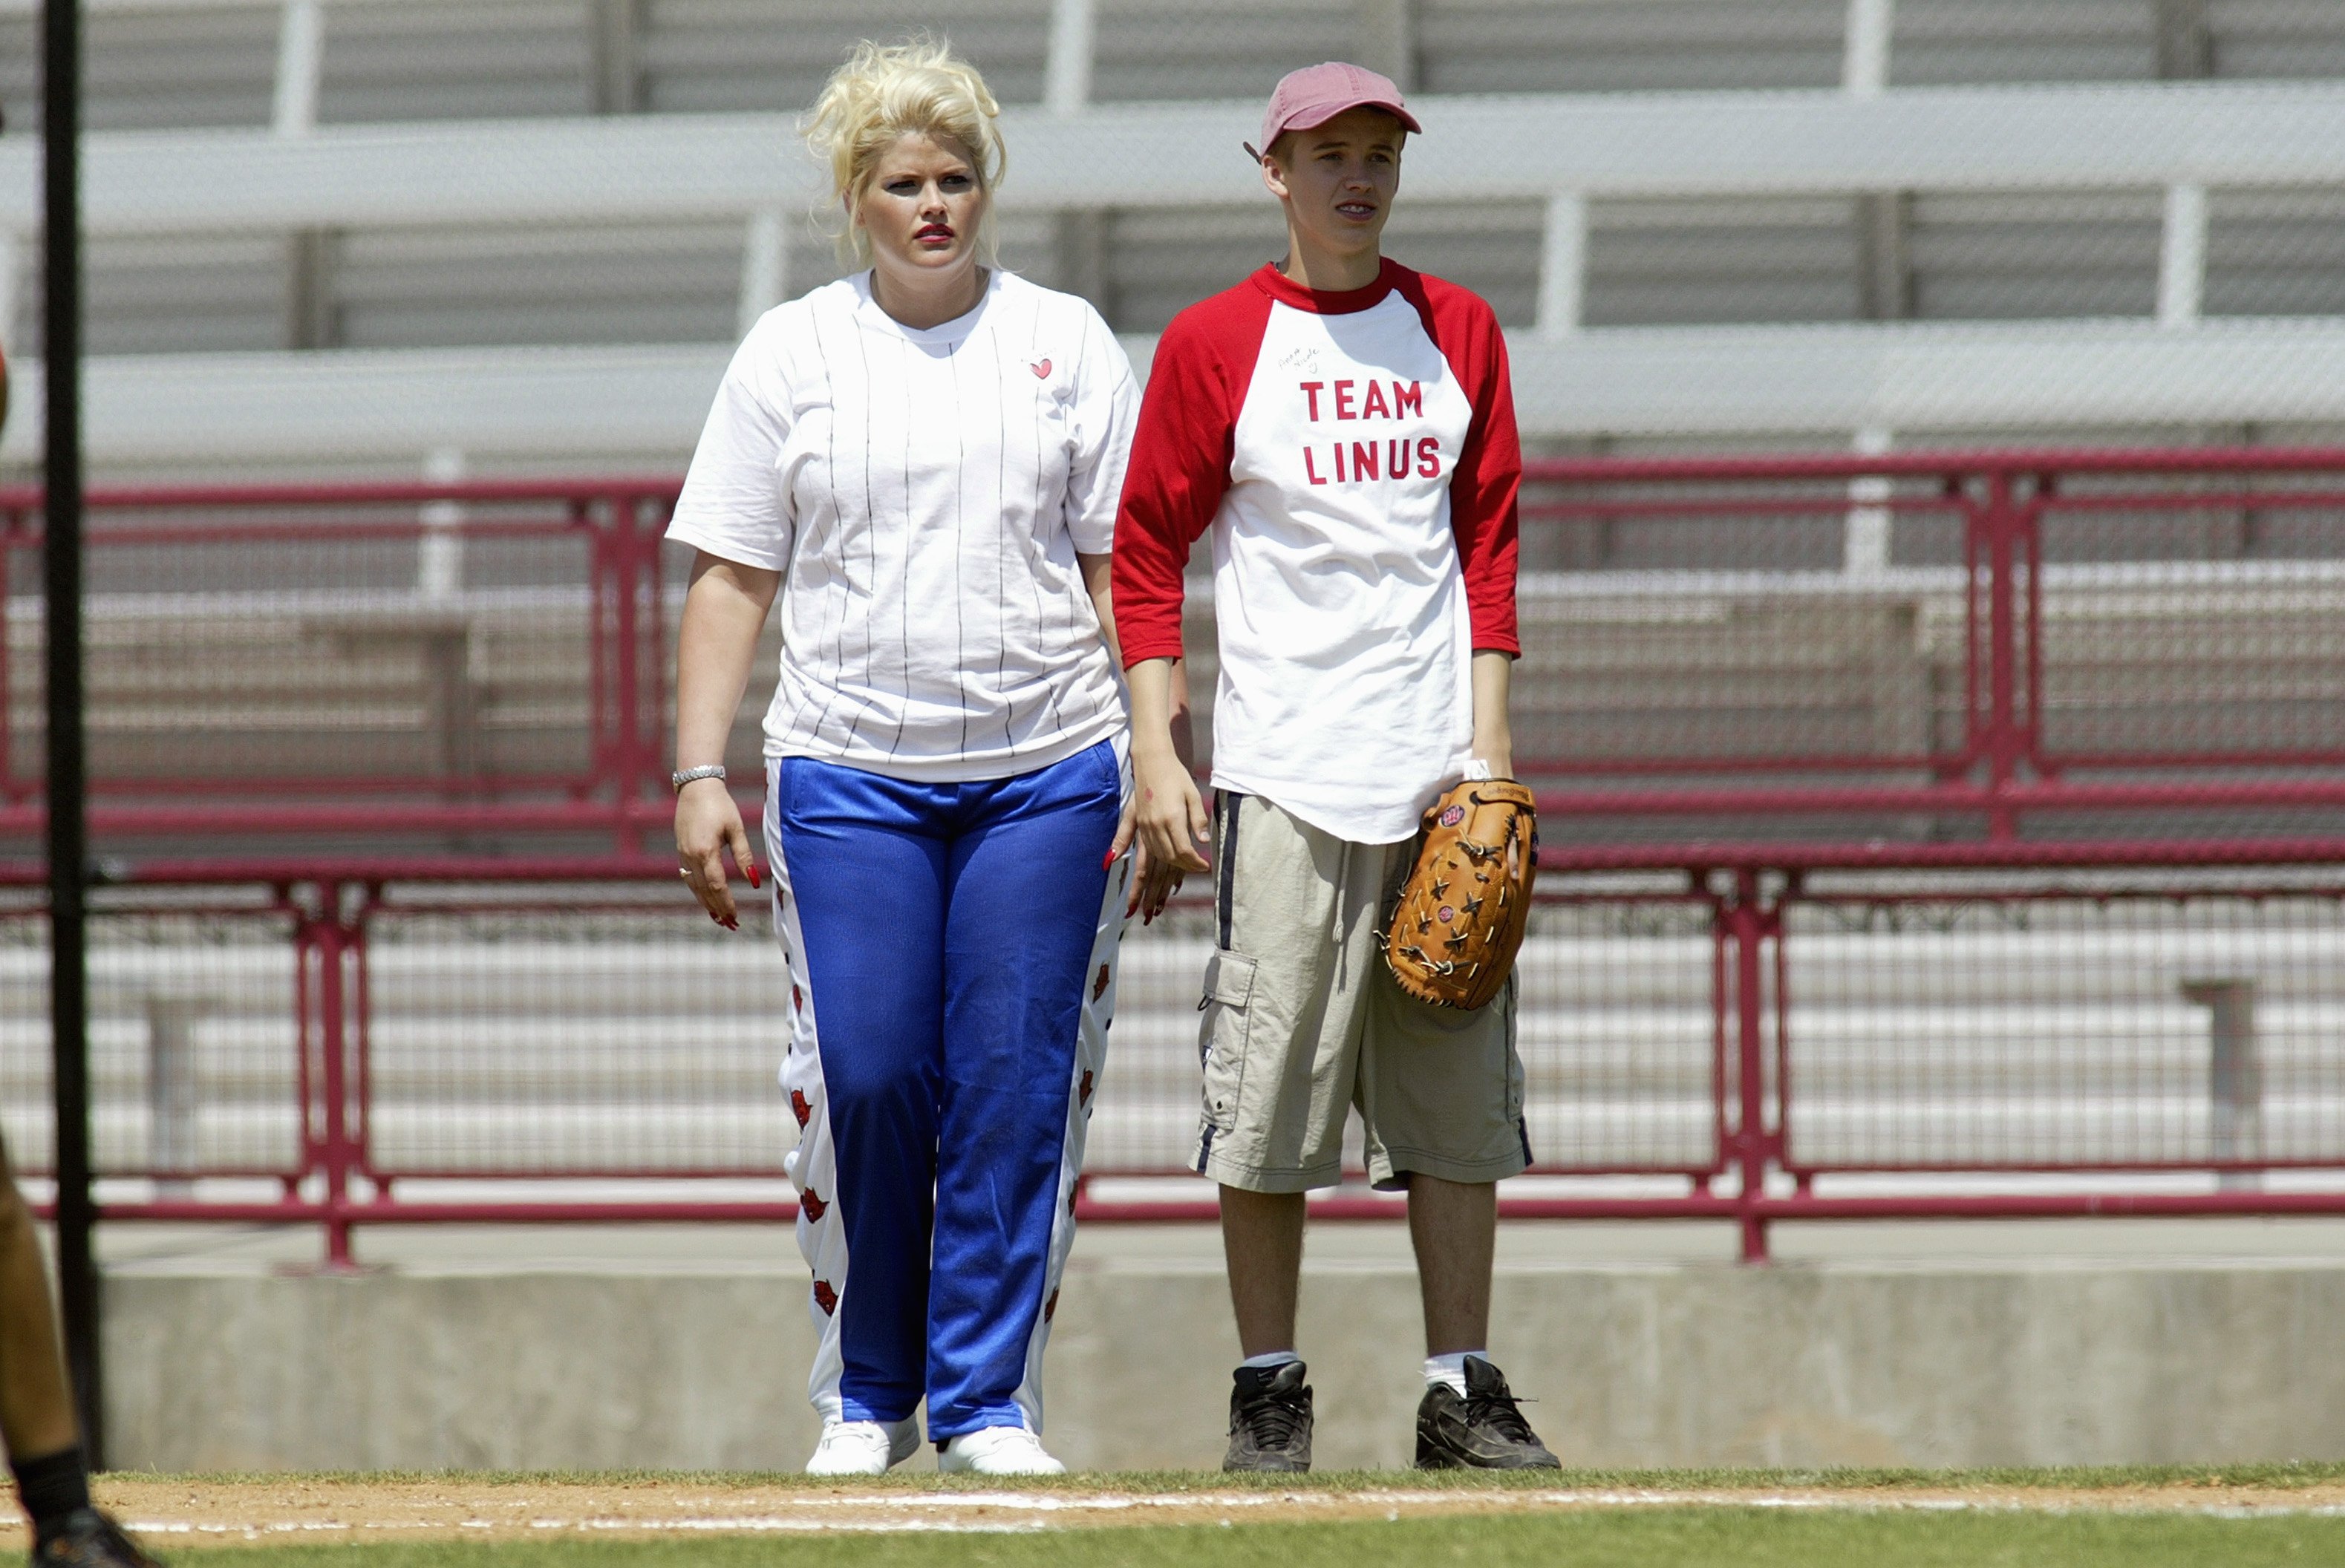 Anna Nicole Smith and son Daniel Wayne Smith participate in a charity softball game on June 30, 2002 at Dedeaux Field in Los Angeles, California. | Source: Getty Images